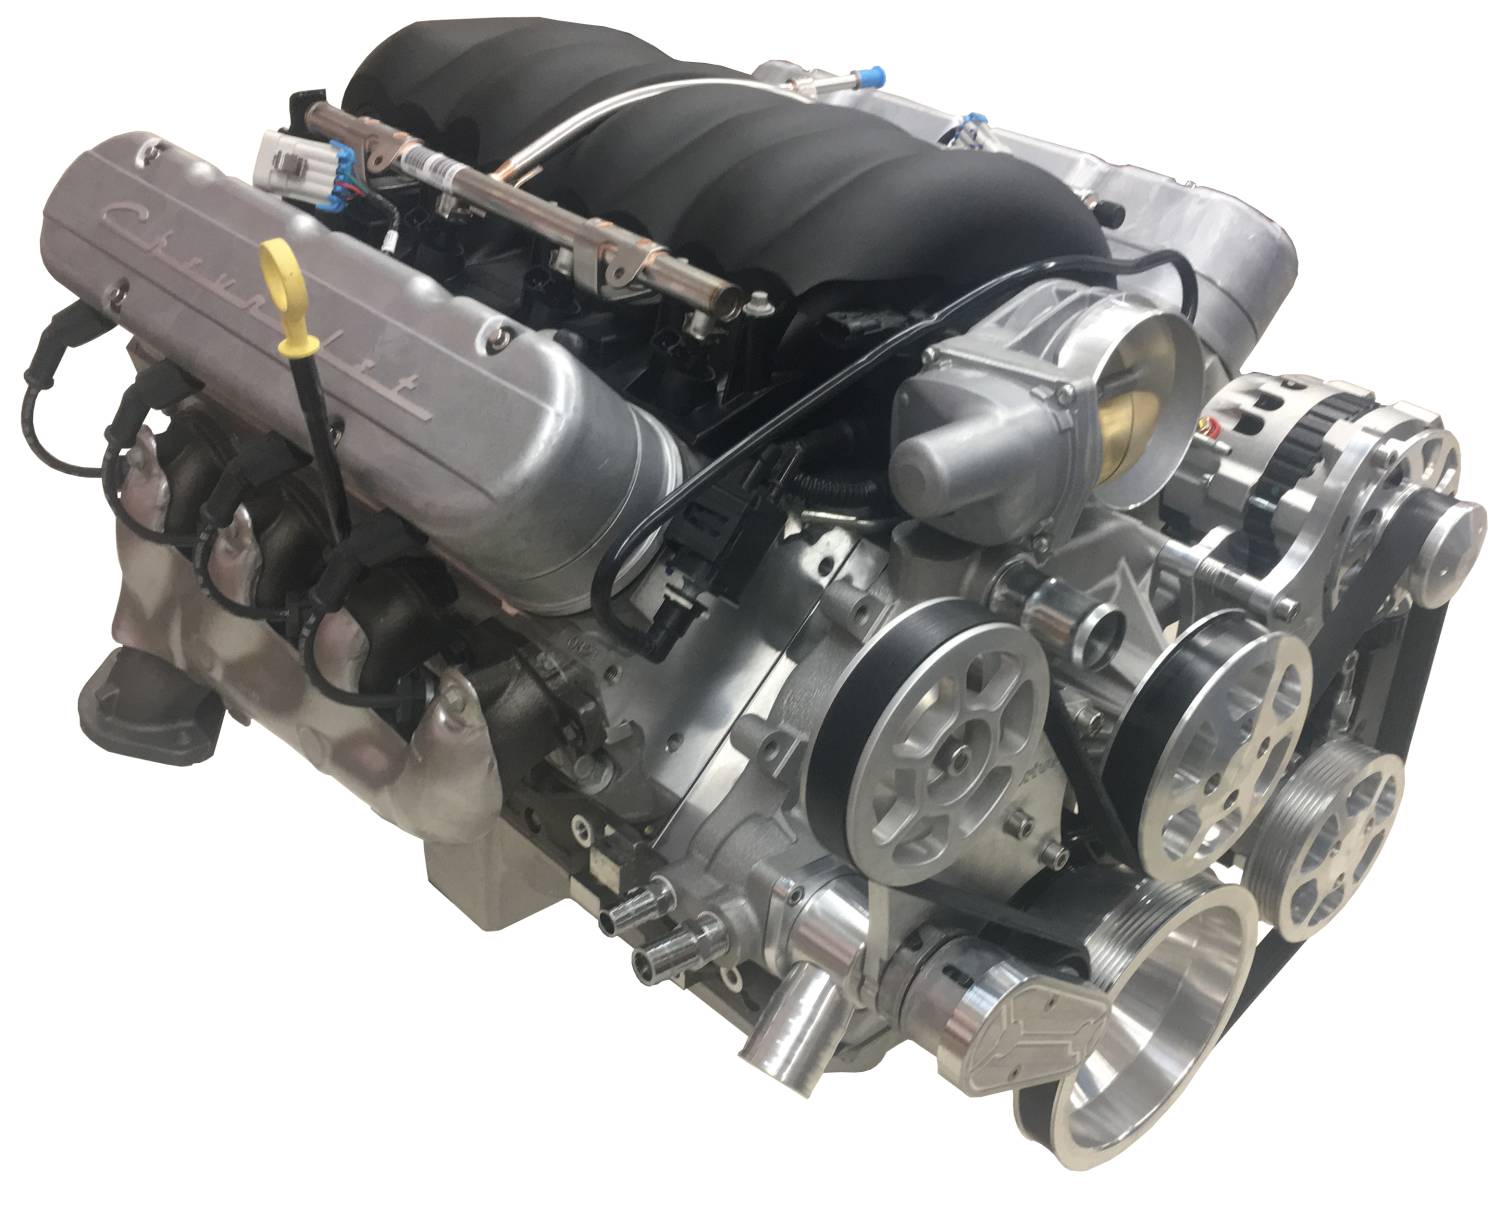 Gmp 19256529 1ed Pace Performance Ls3 525hp Crate Engine Package